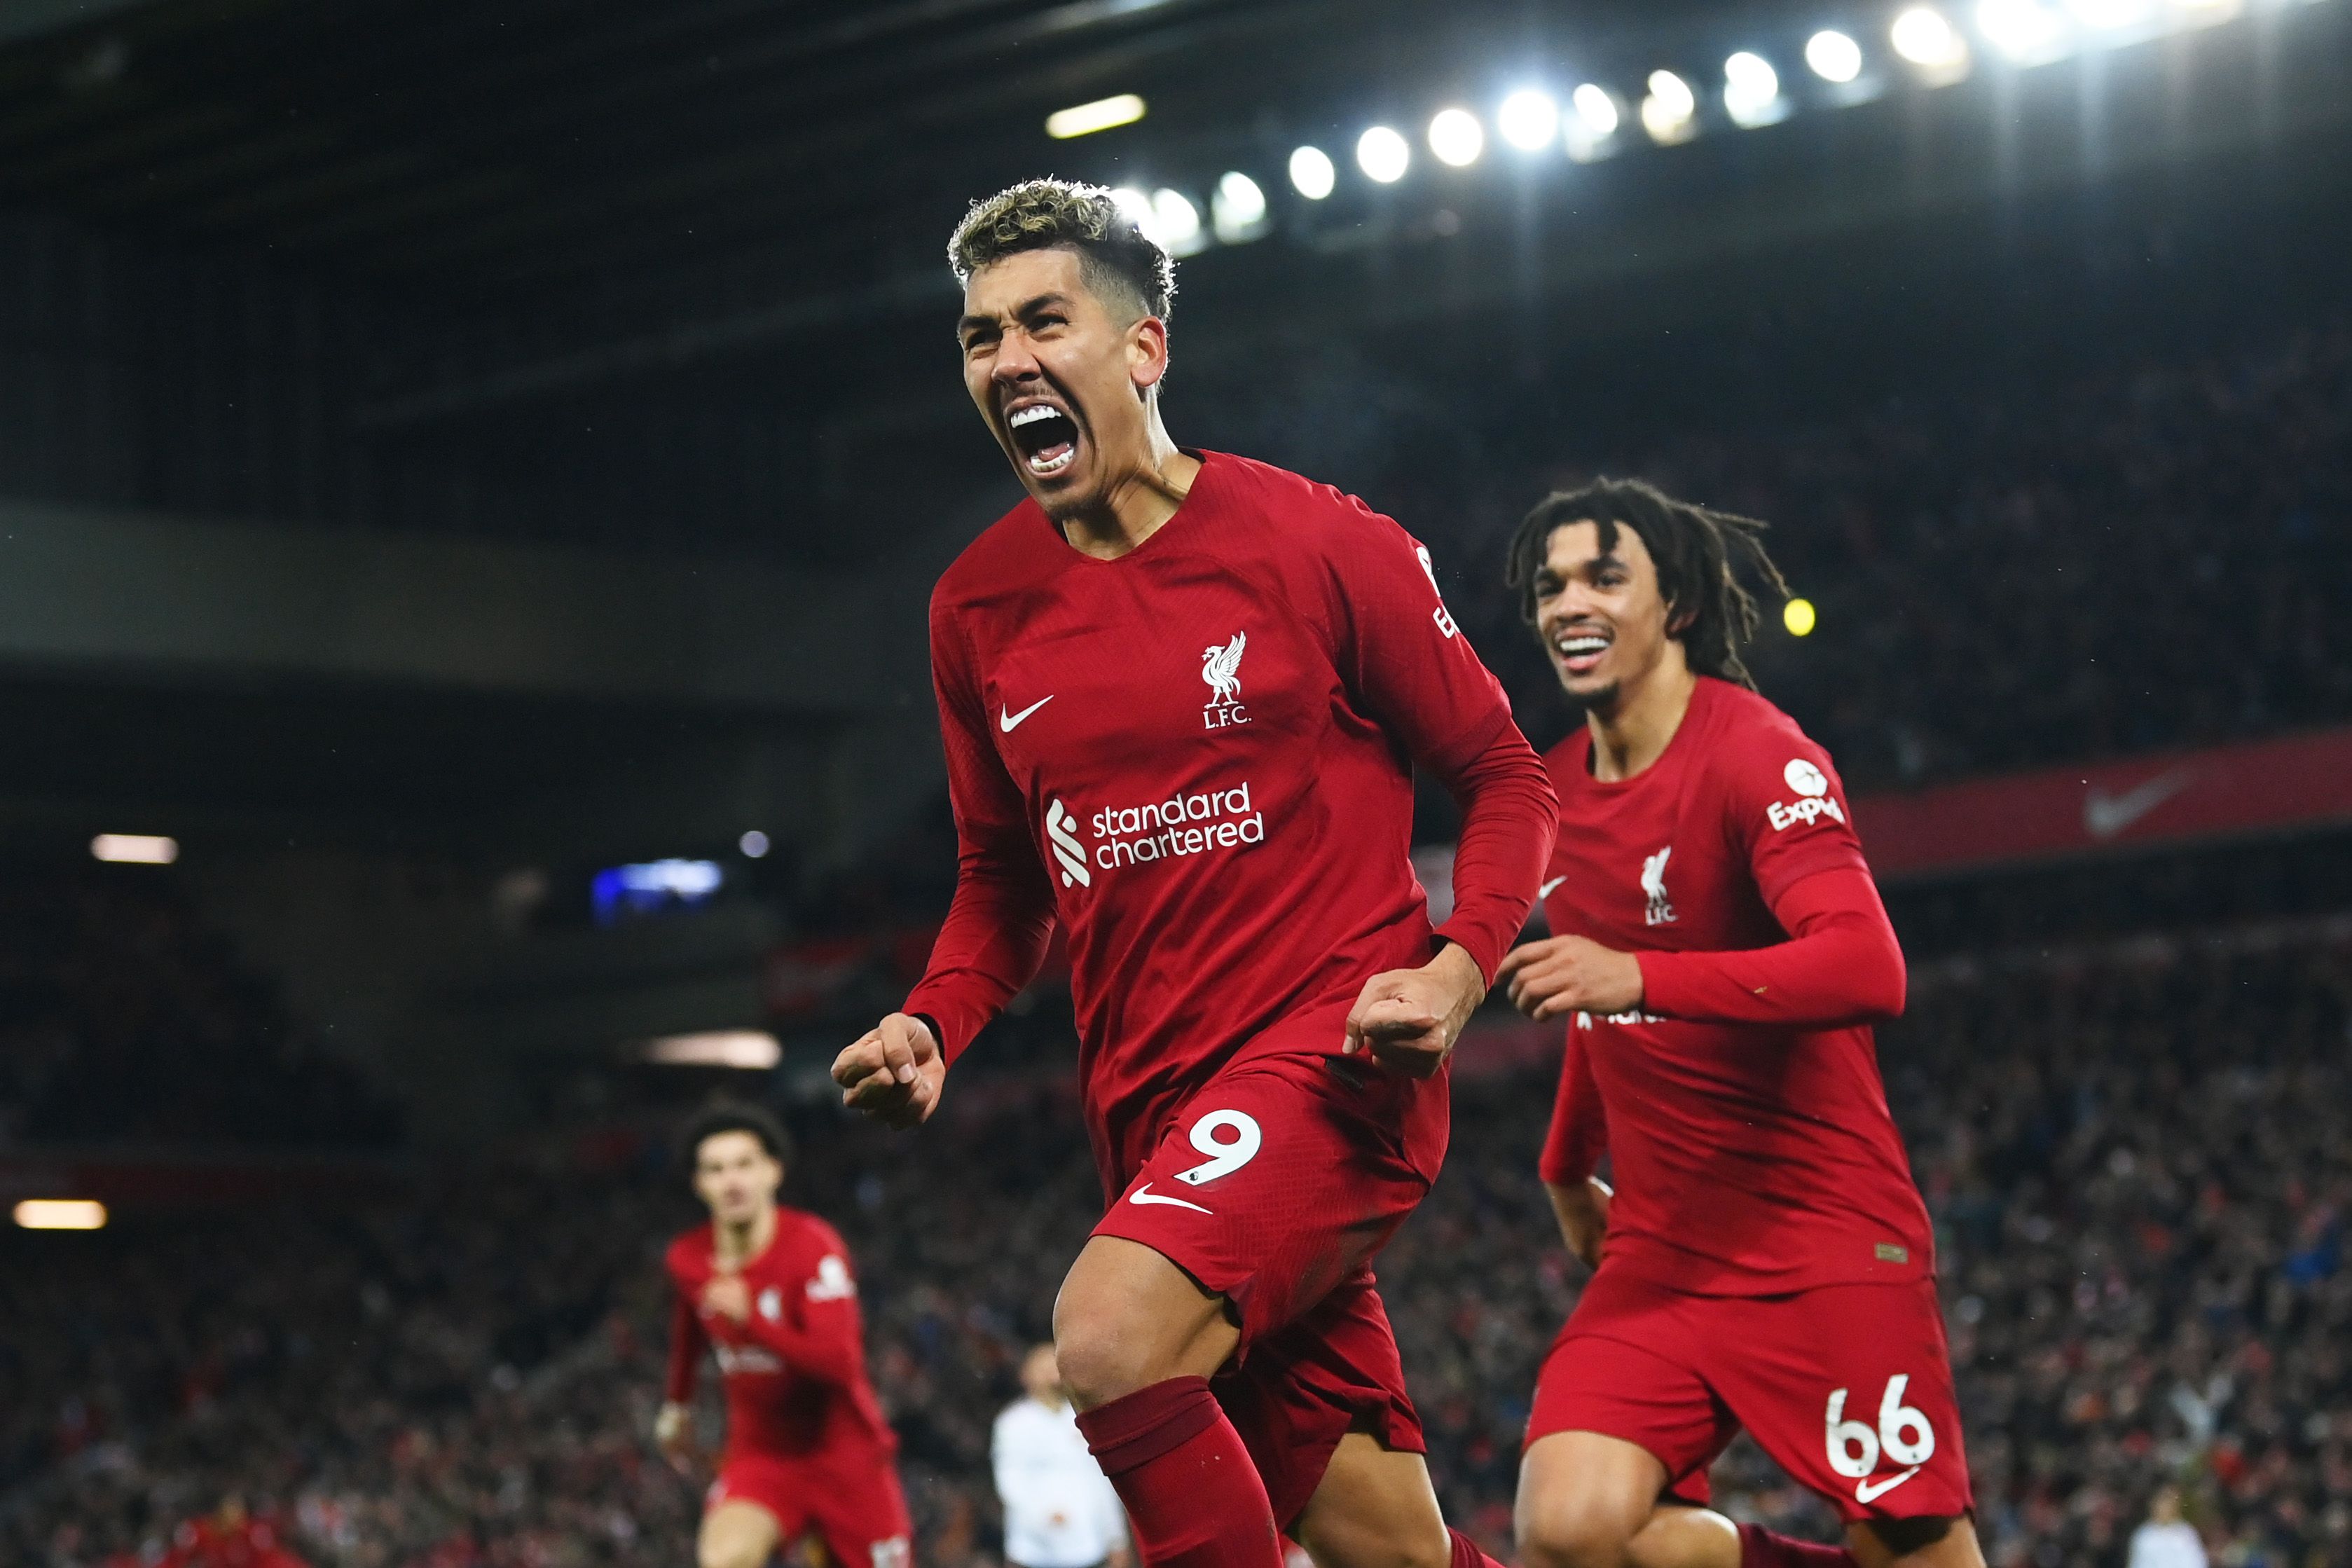 Liverpool's Roberto Firmino celebrates a goal by running towards the Kop closely followed by Trent Alexander-Arnold